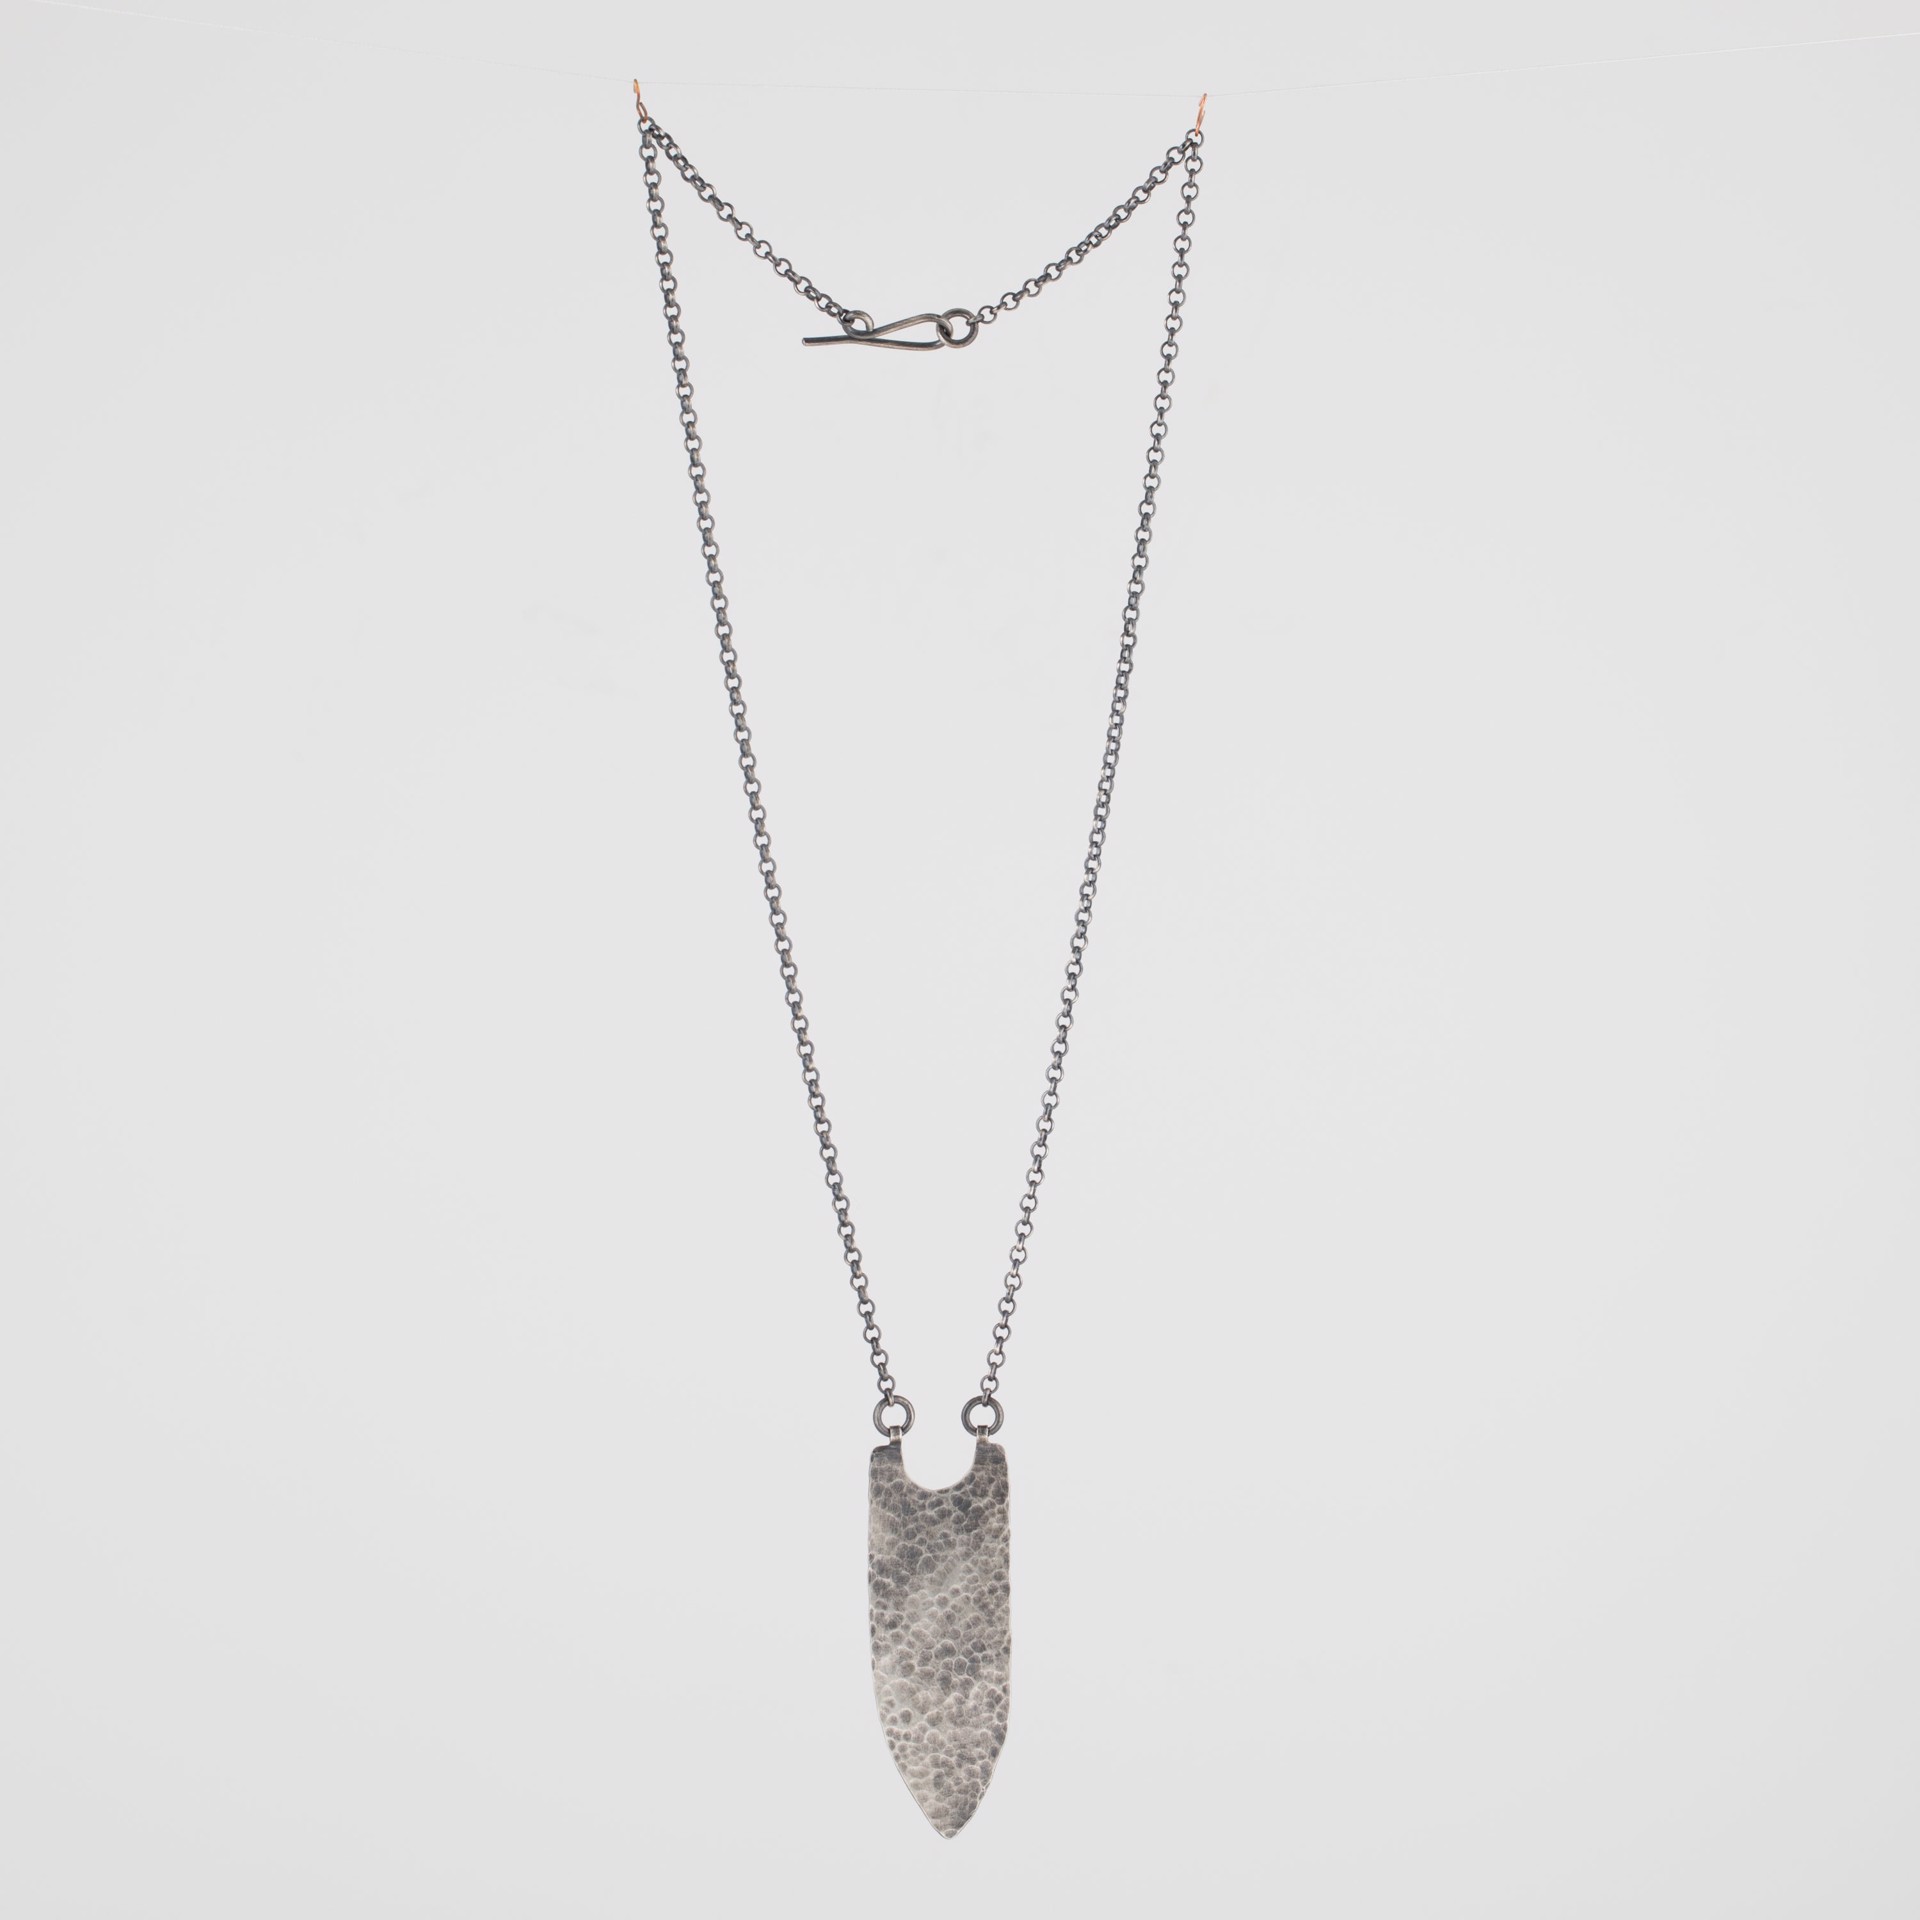 Banner Necklace in Silver by Clementine & Co. Jewelry